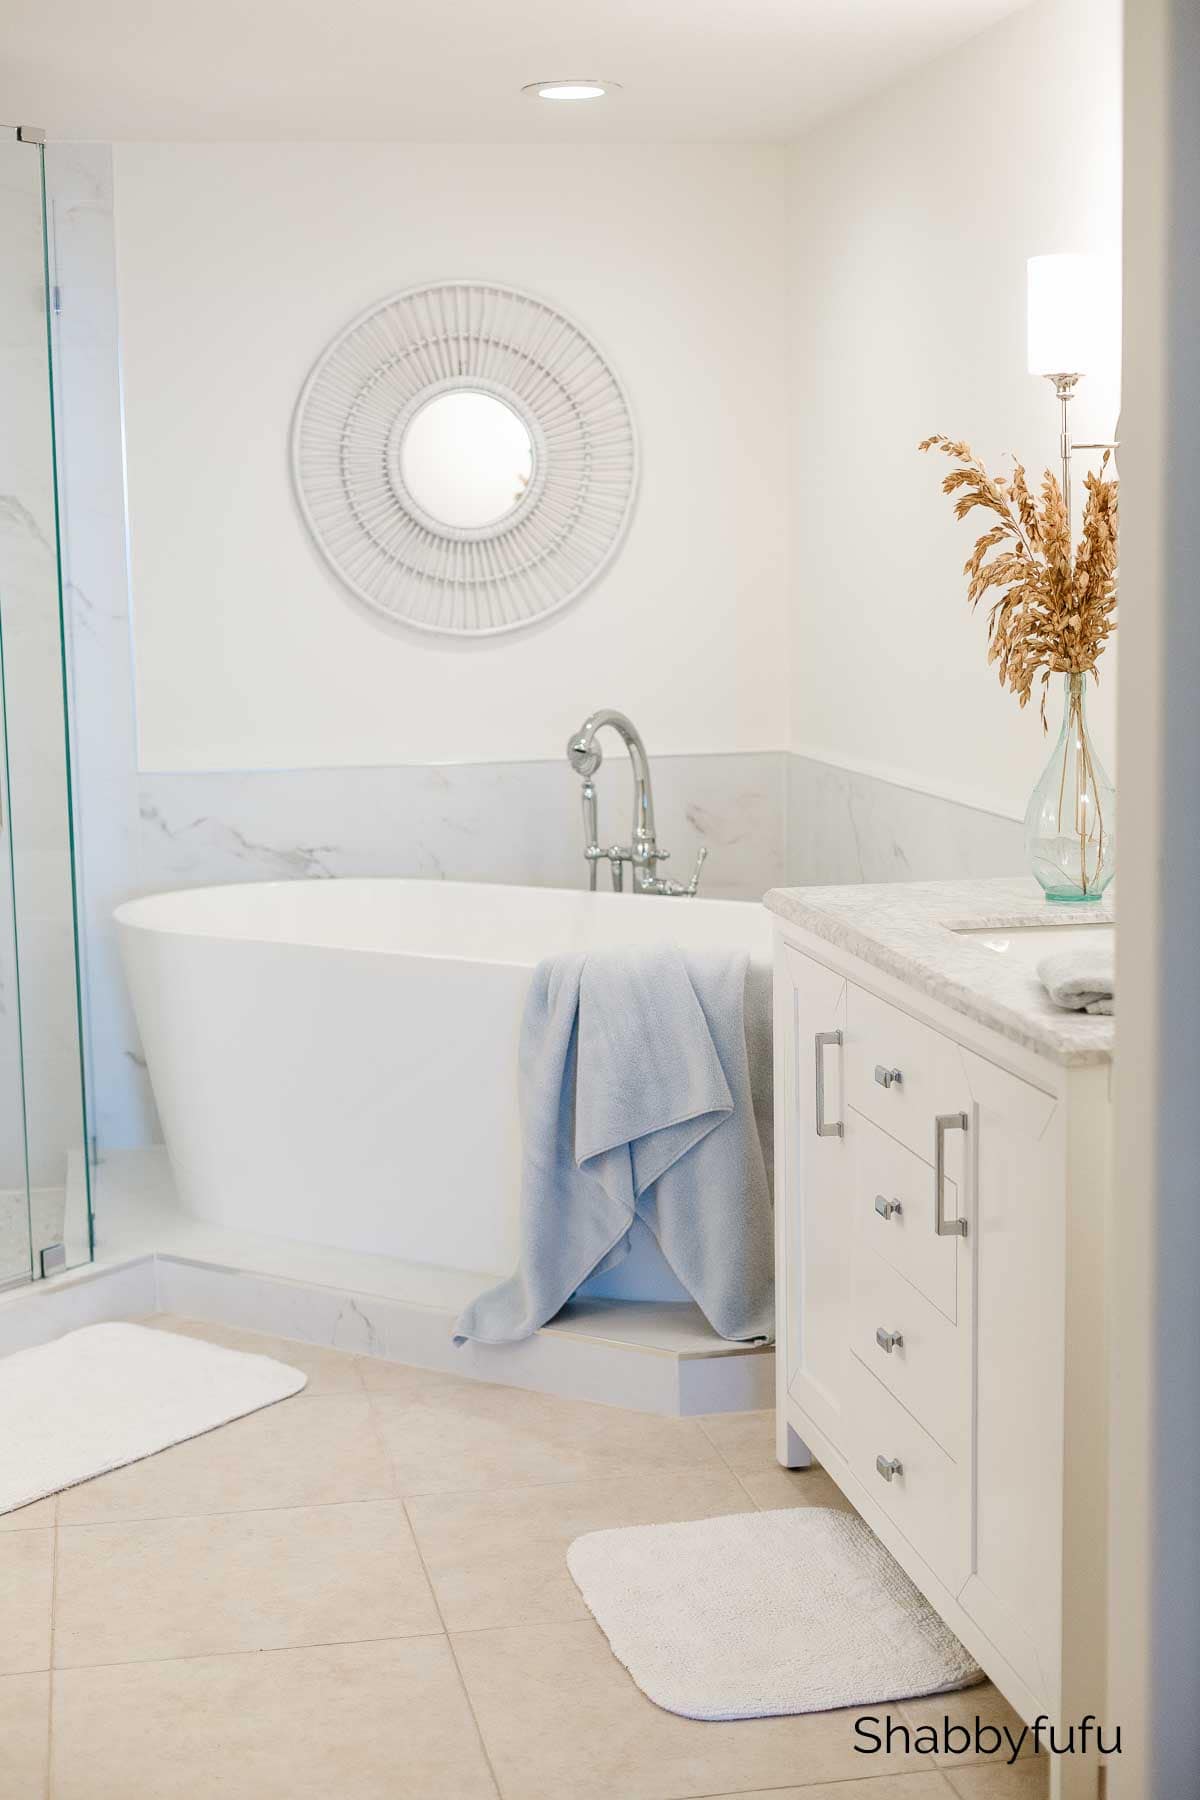 Spa Inspired Bathroom Renovations – The Reveal!